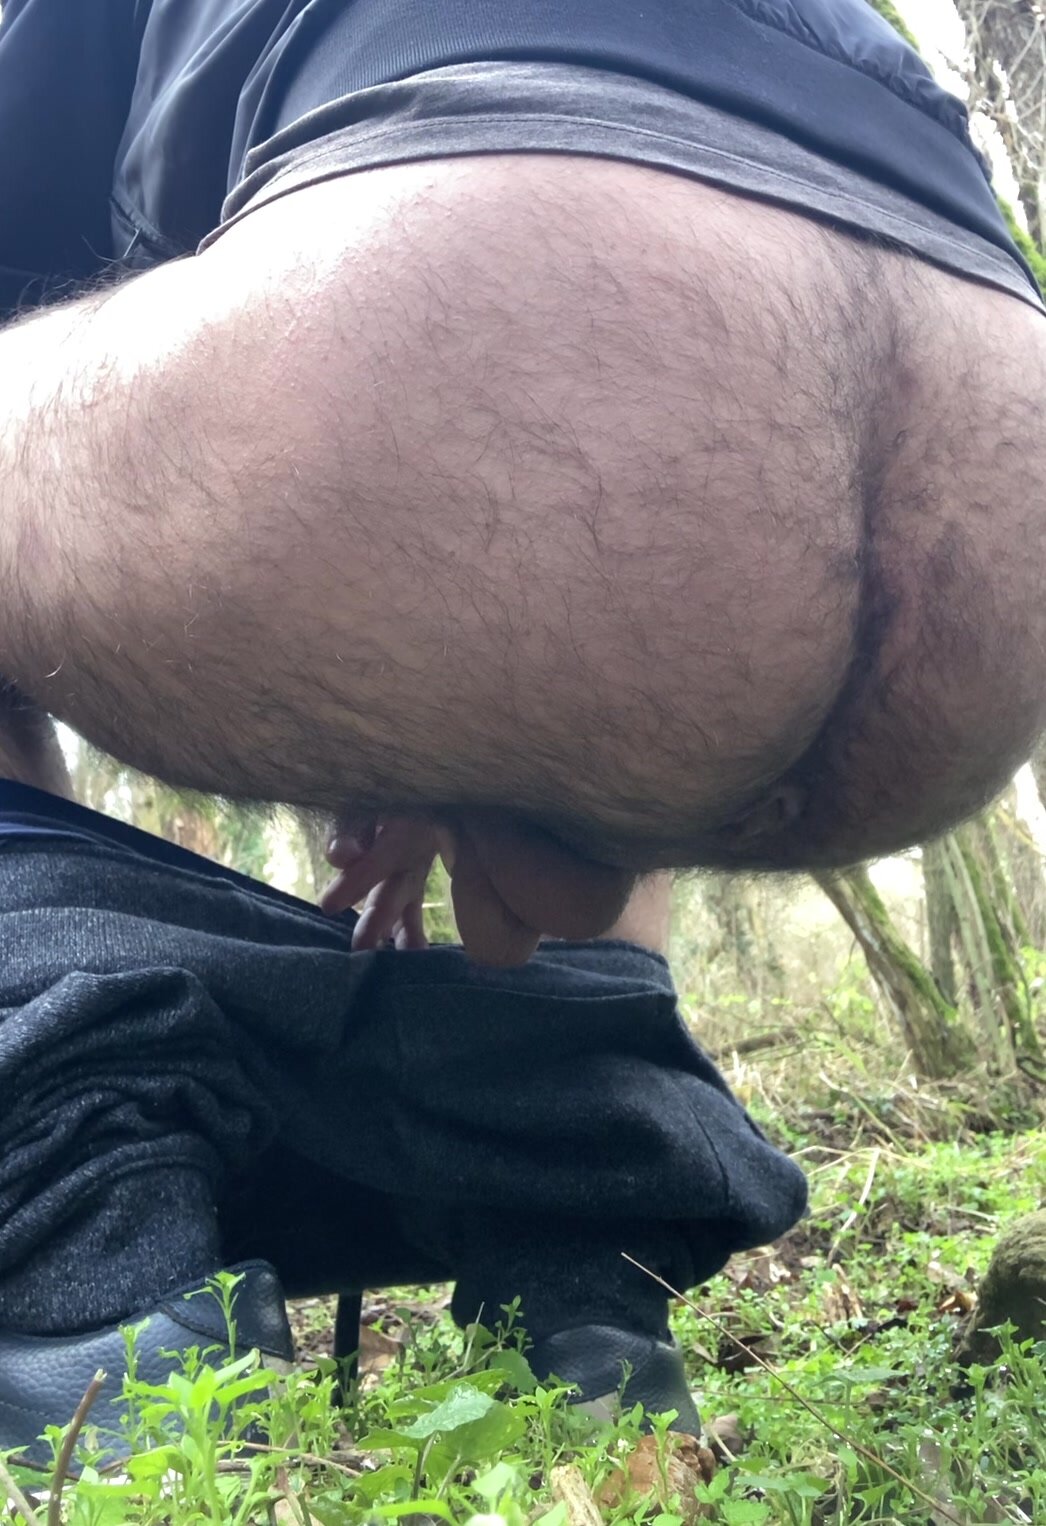 Quick shit in the woods with thick gush of precum